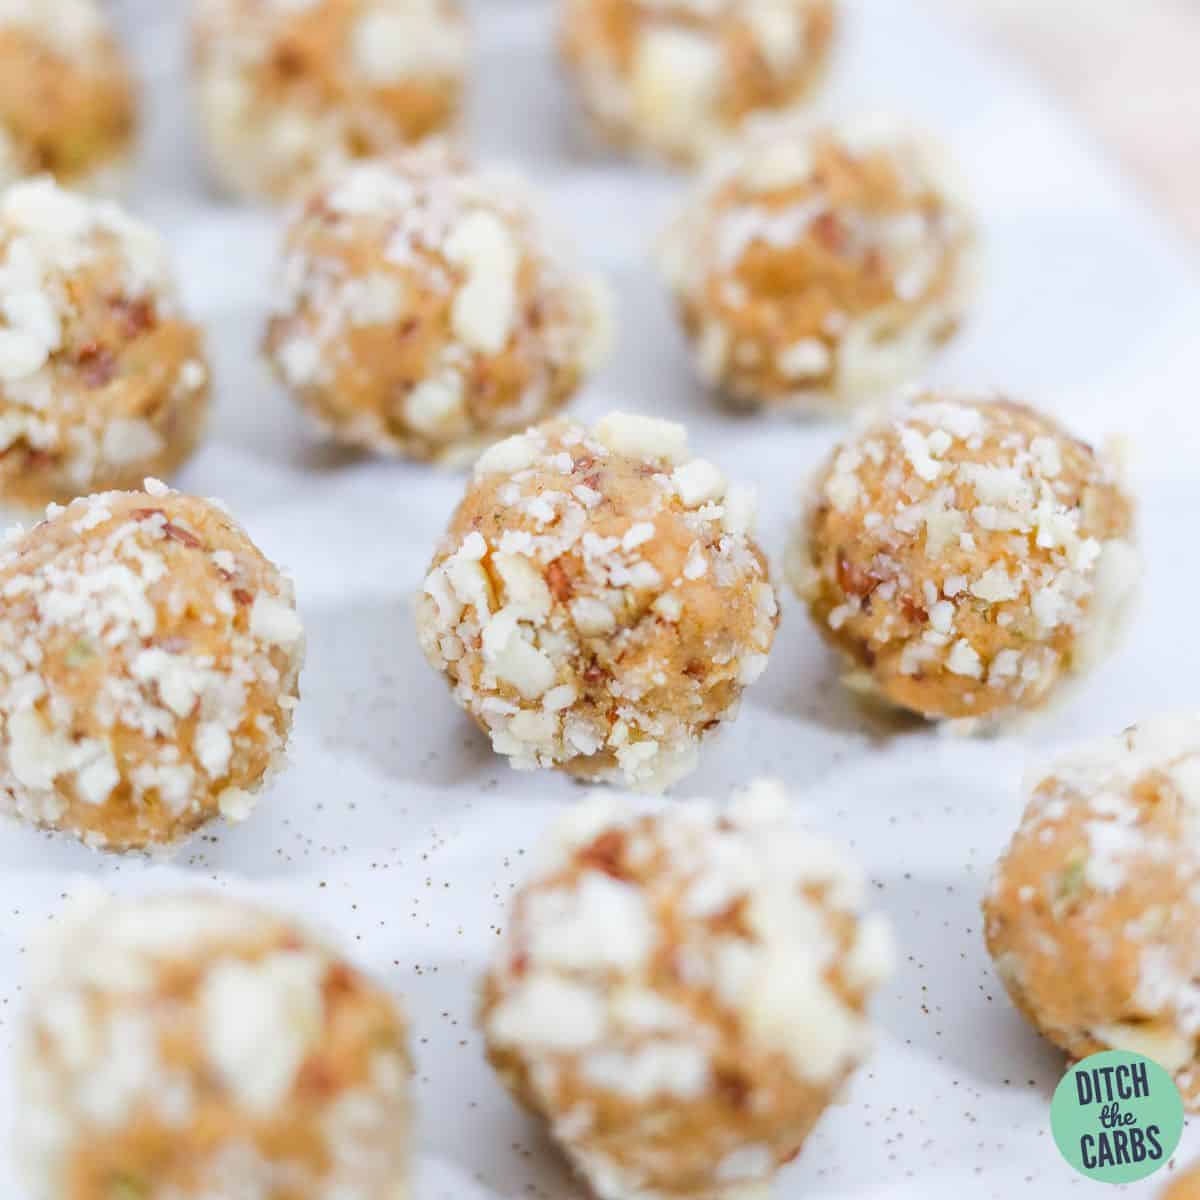 https://thinlicious.com/wp-content/uploads/2022/12/Keto-Protein-Balls-Featured-Image-Template-1200x1200-1.jpg